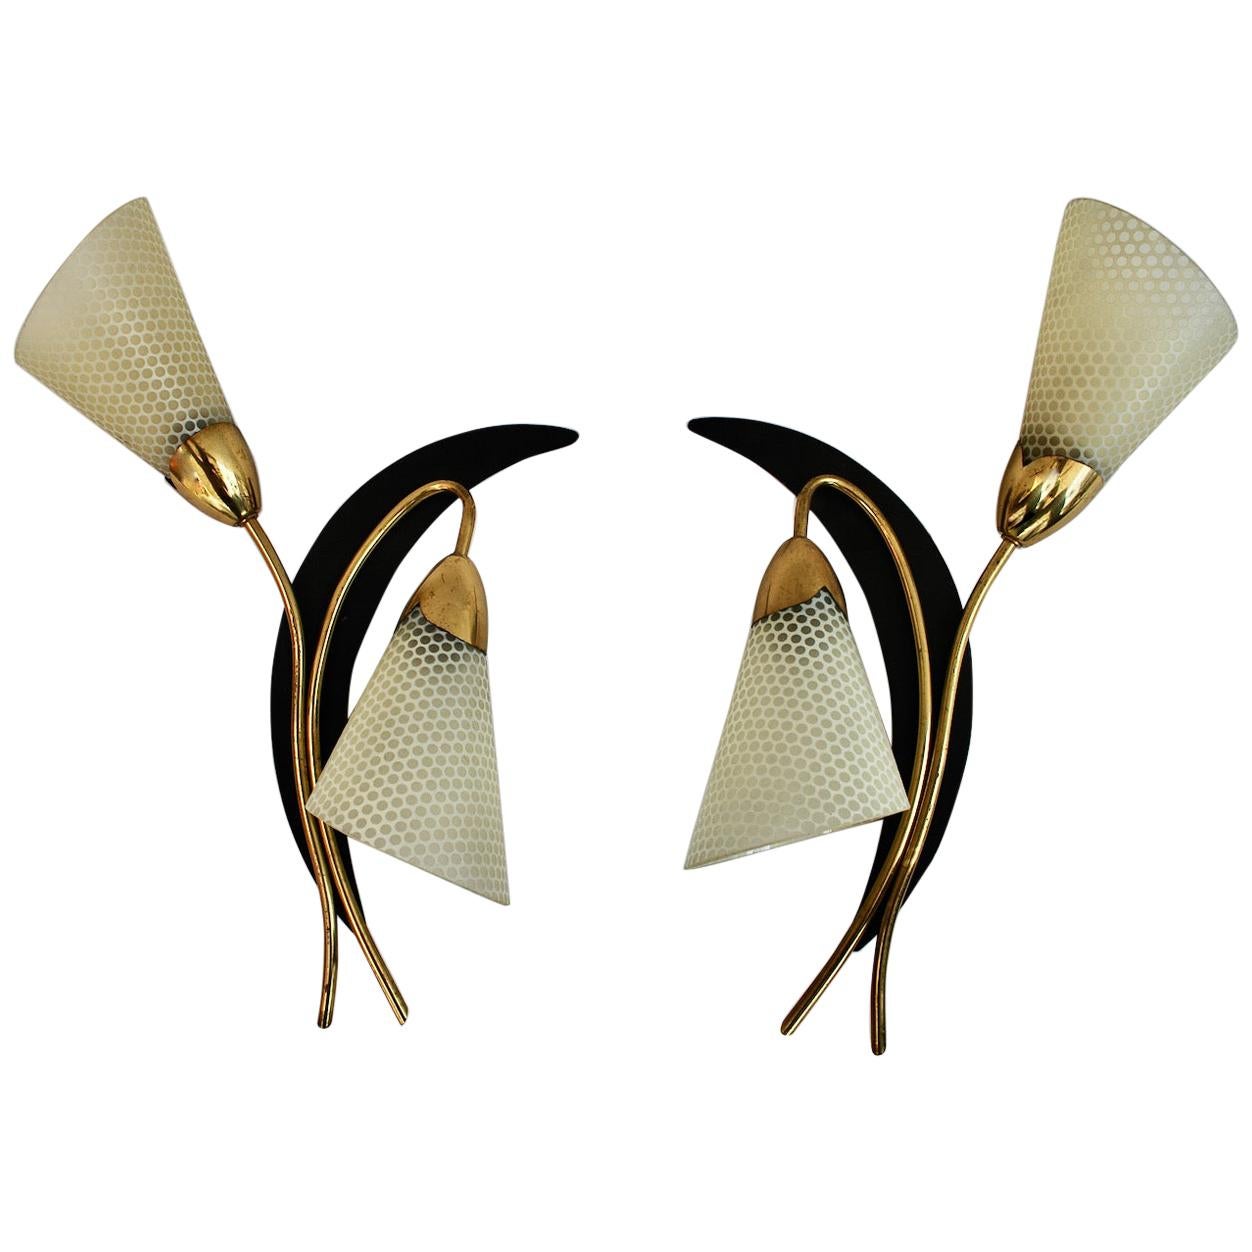 Sexy Large Pair of French Mid Century Sconces 'Possibly Maison Arlus' For Sale